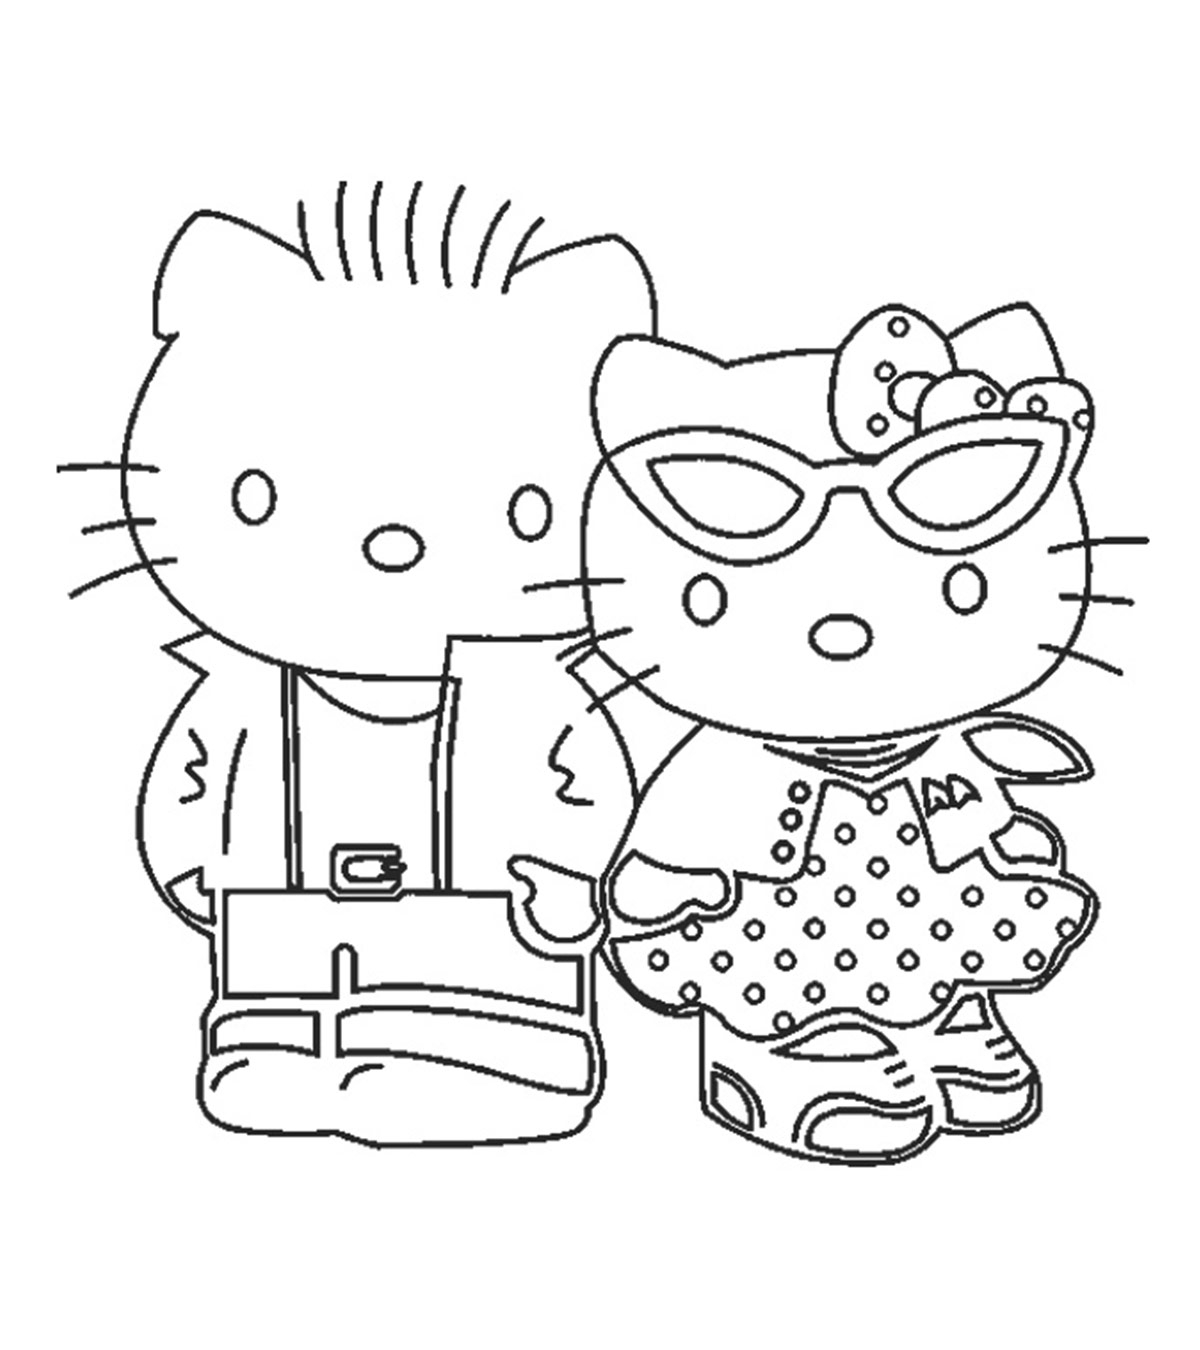 My Room Coloring Pages Top 75 Free Printable Hello Kitty Coloring Pages Online